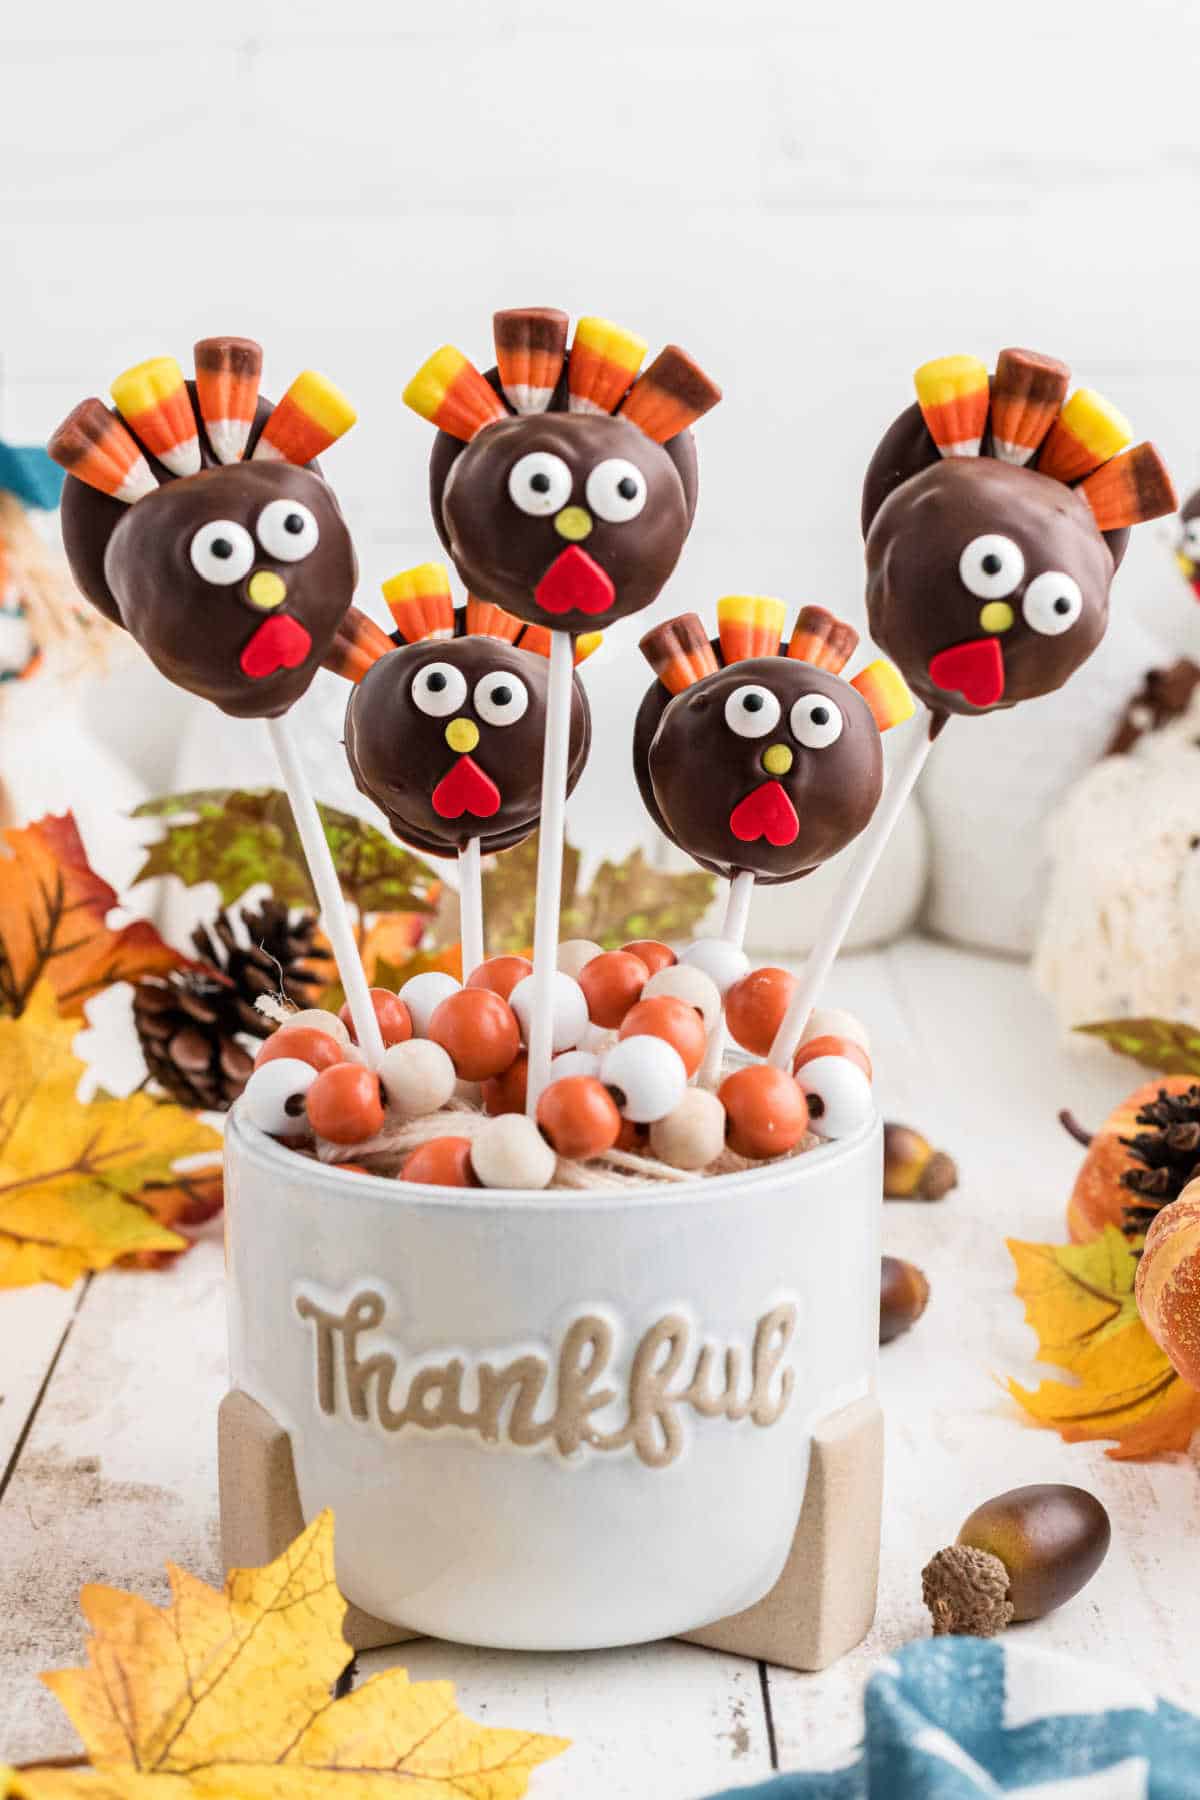 A thanksgiving cake pop recipe, with cake pops sitting in a Thankful vase.